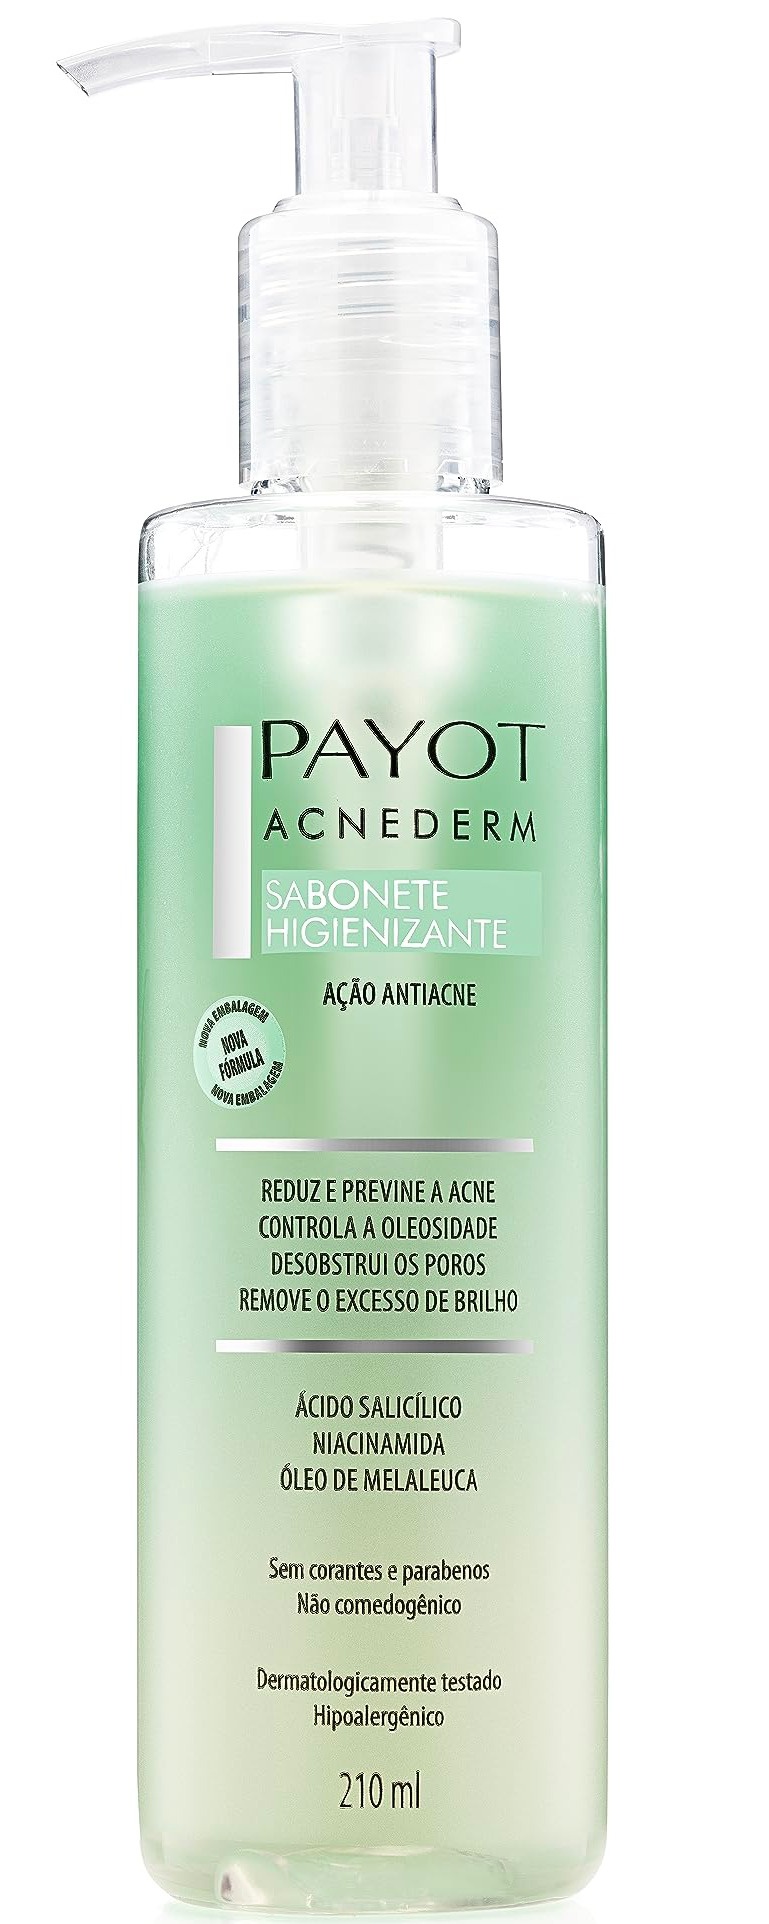 Payot Acnederm